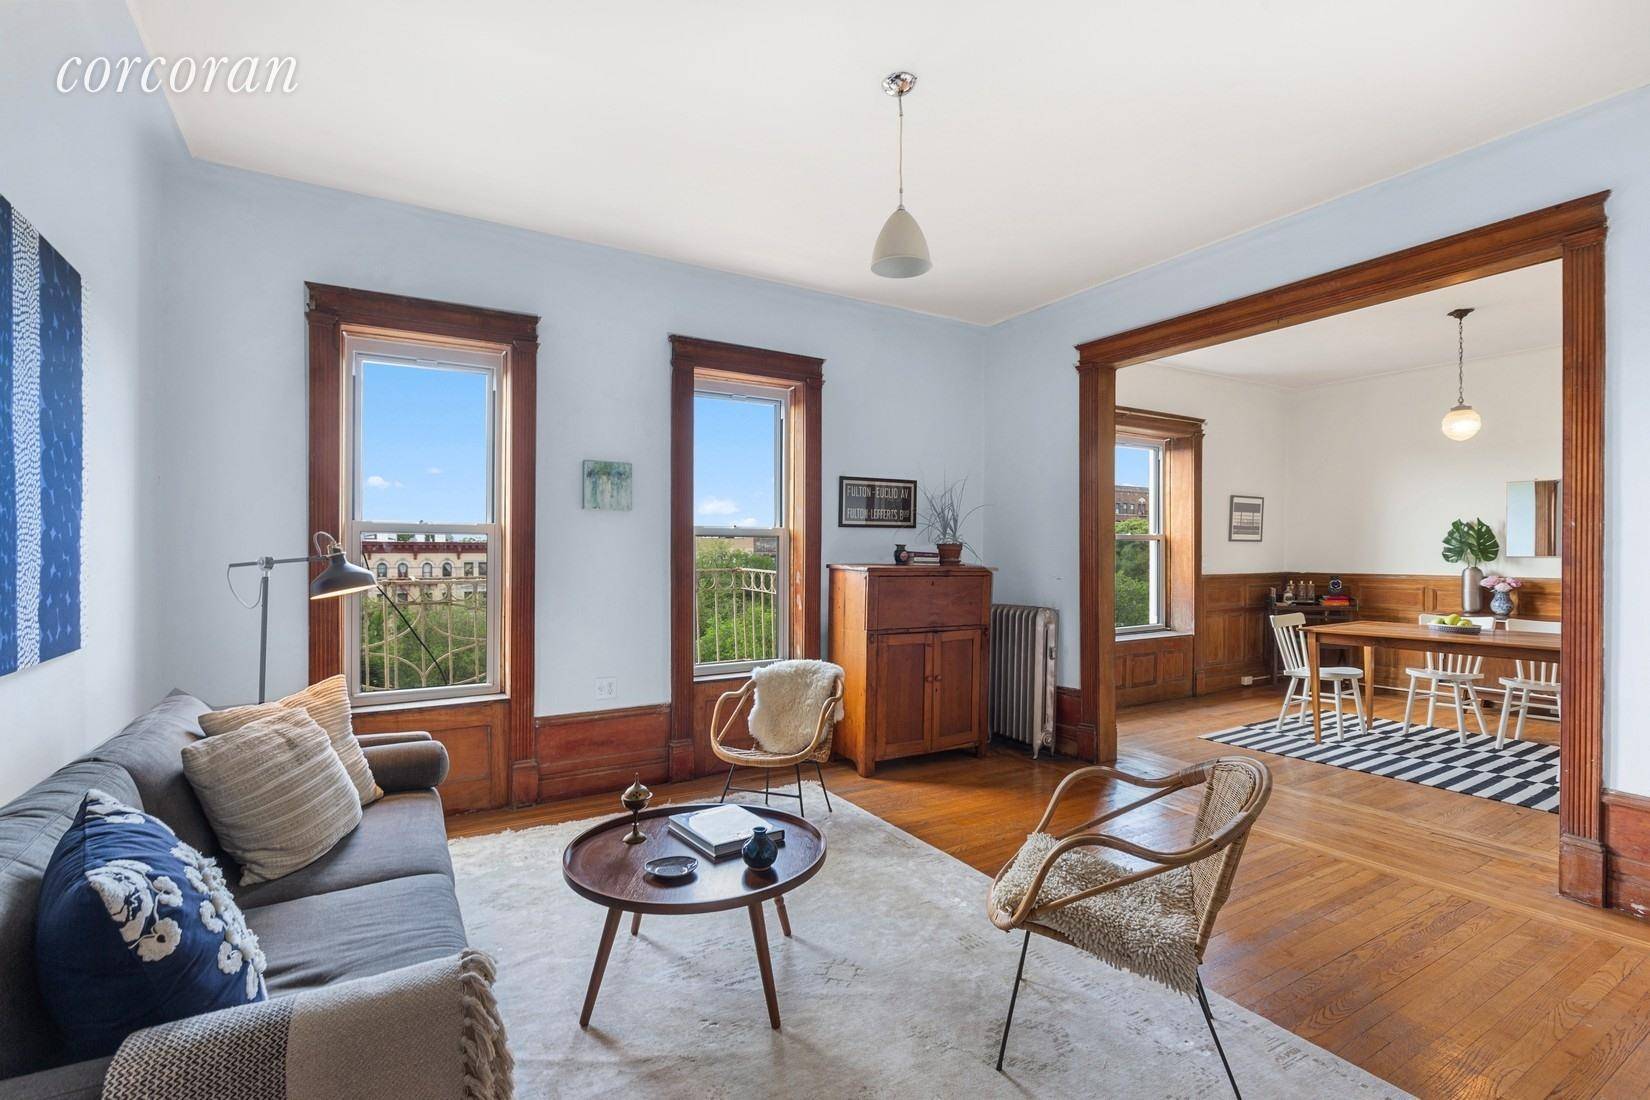 Space, sun, and style ! At over 1, 000 sq feet, this sprawling prewar coop apartment has two bedrooms and a FORMAL DINING ROOM.